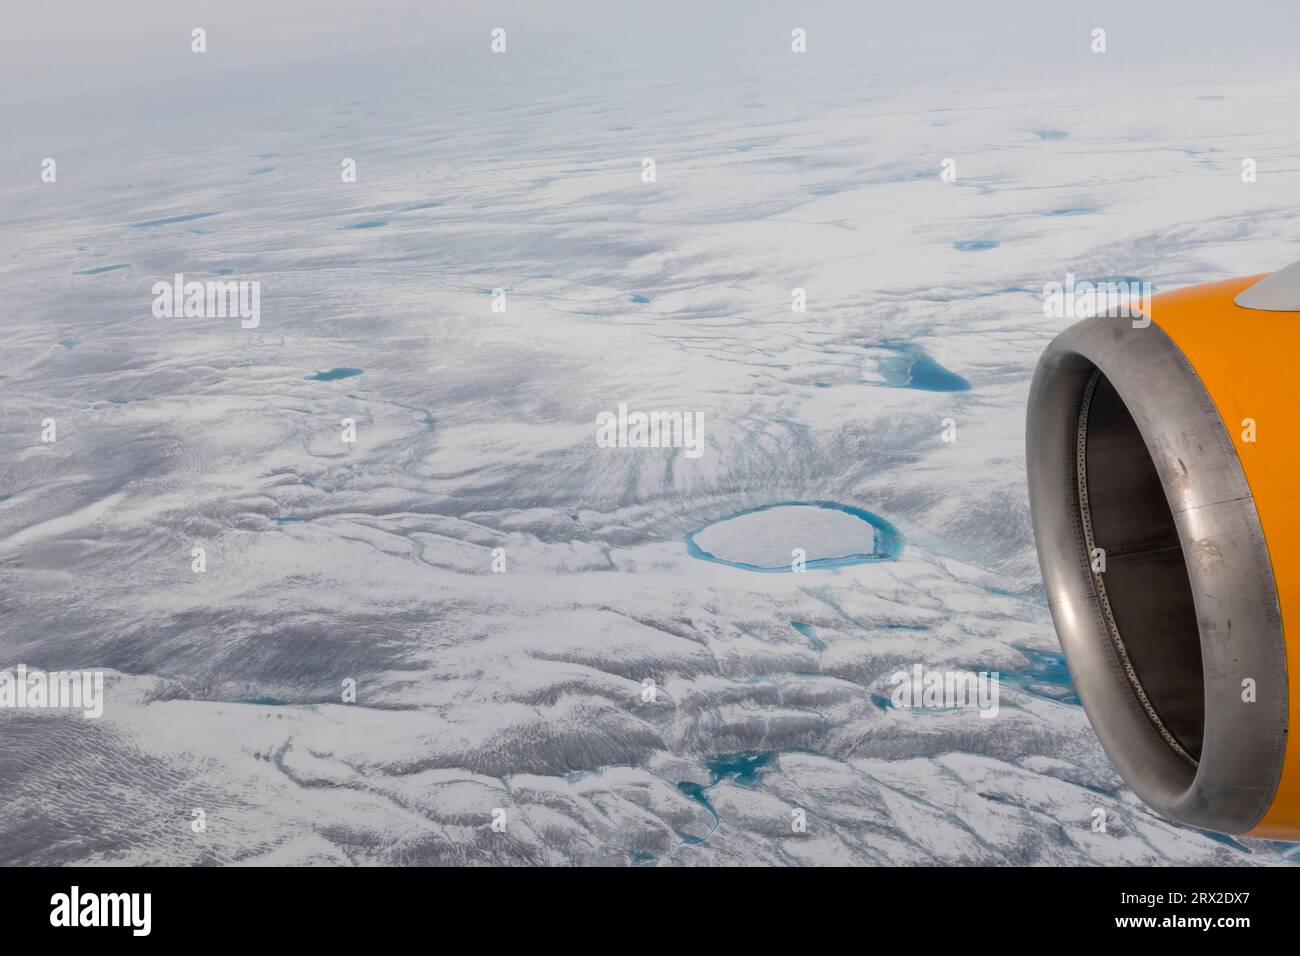 A commercial flight over the Greenland Ice Sheet flying into Kangerlussuaq, Qeqqata municipality, Western Greenland, Polar Regions Stock Photo